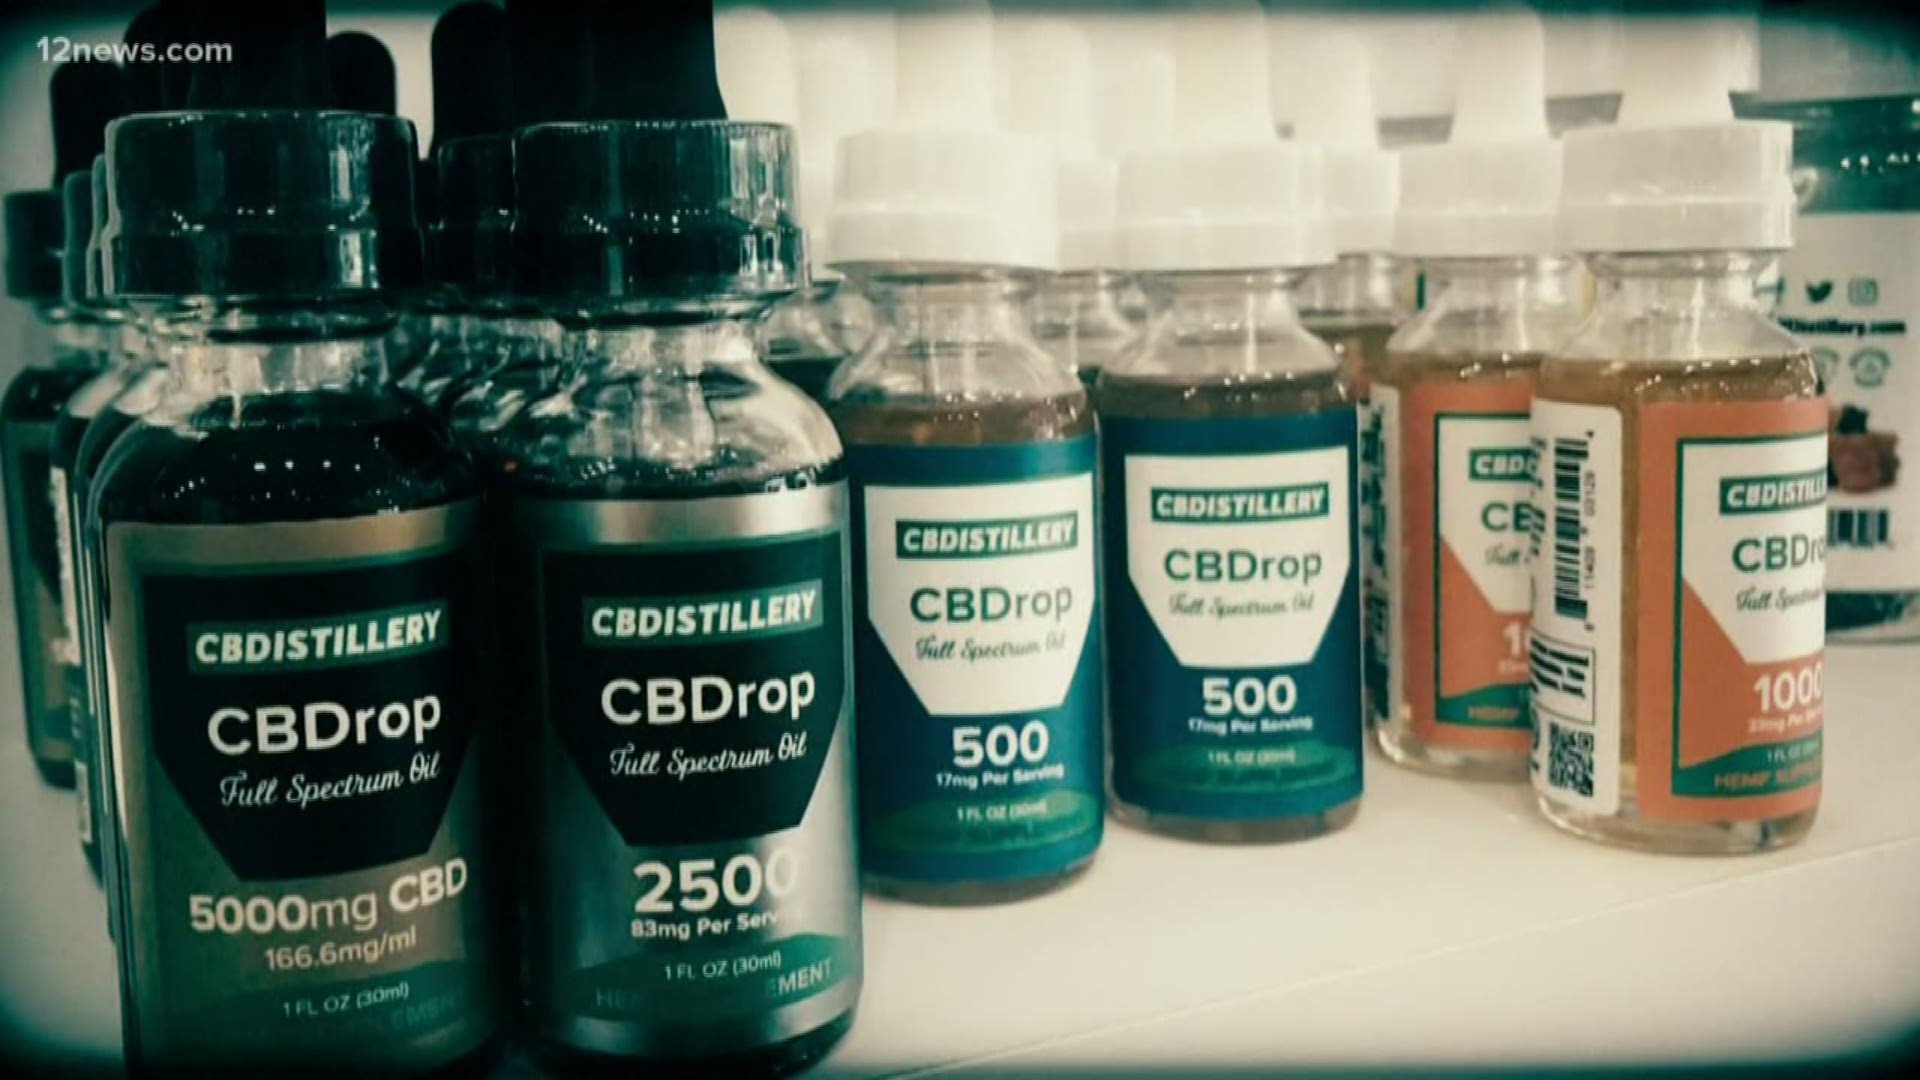 Drug tests are not full proof, especially when it comes to differentiating pot from CBD. Drug tests are flagging people for pot when they have CBD in their system.